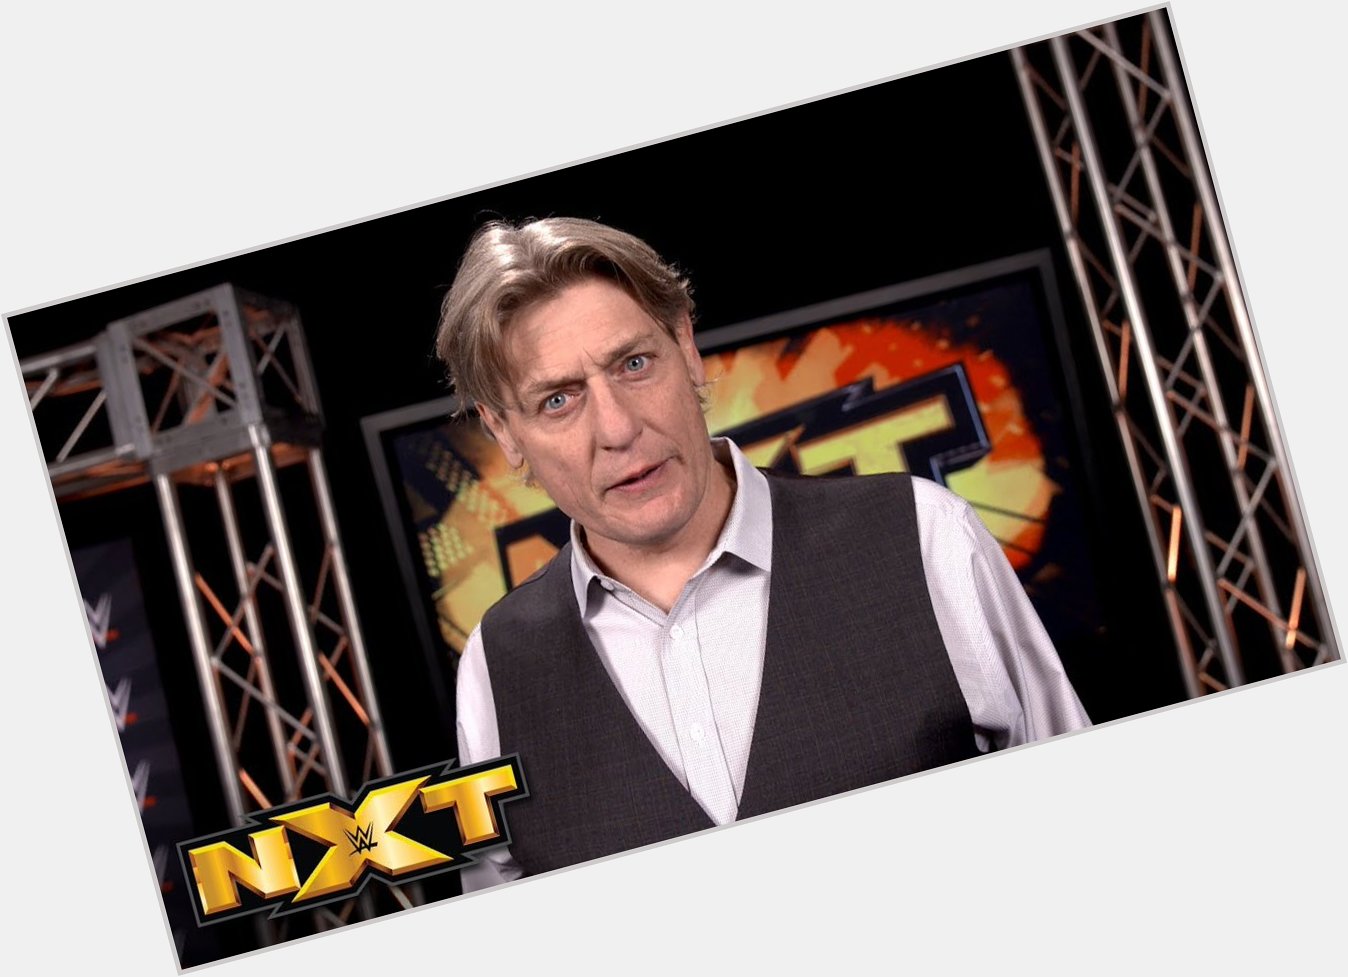 Happy Birthday to NXT GM William Regal who turns 50 today! 